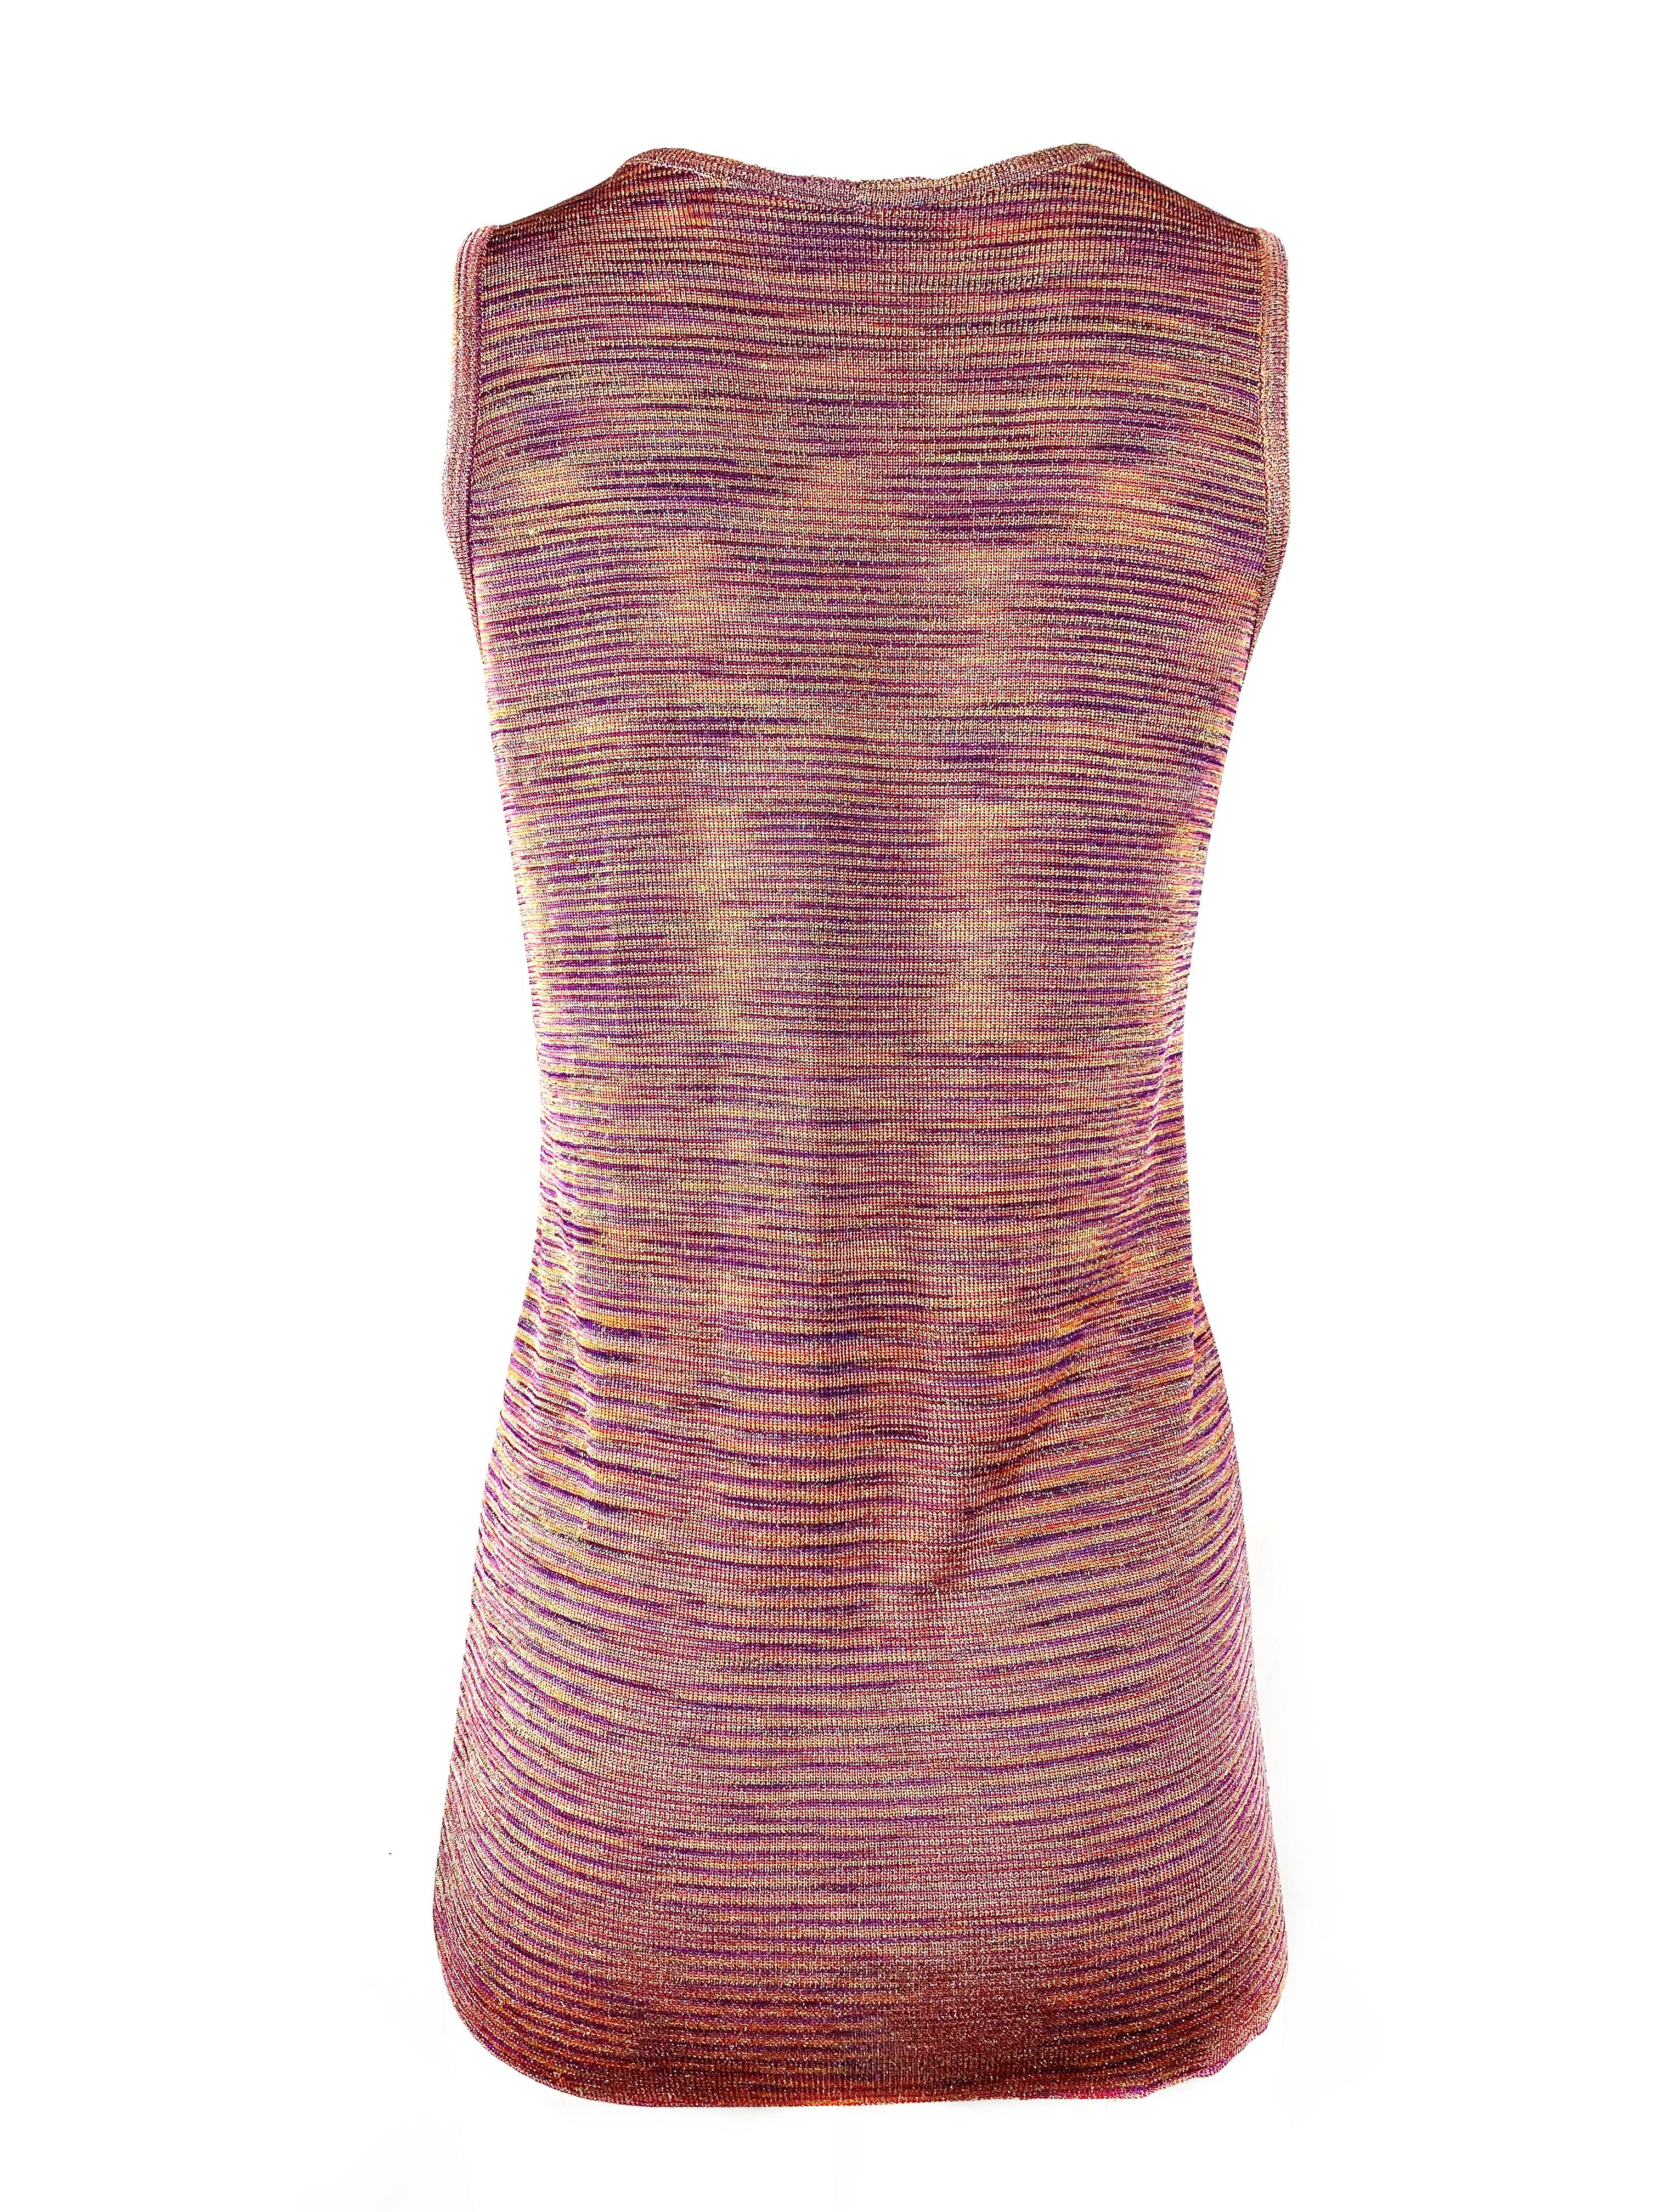 Missoni Multicolor Knit Sleeveless Top and Cardigan Set Size 40 For Sale 5